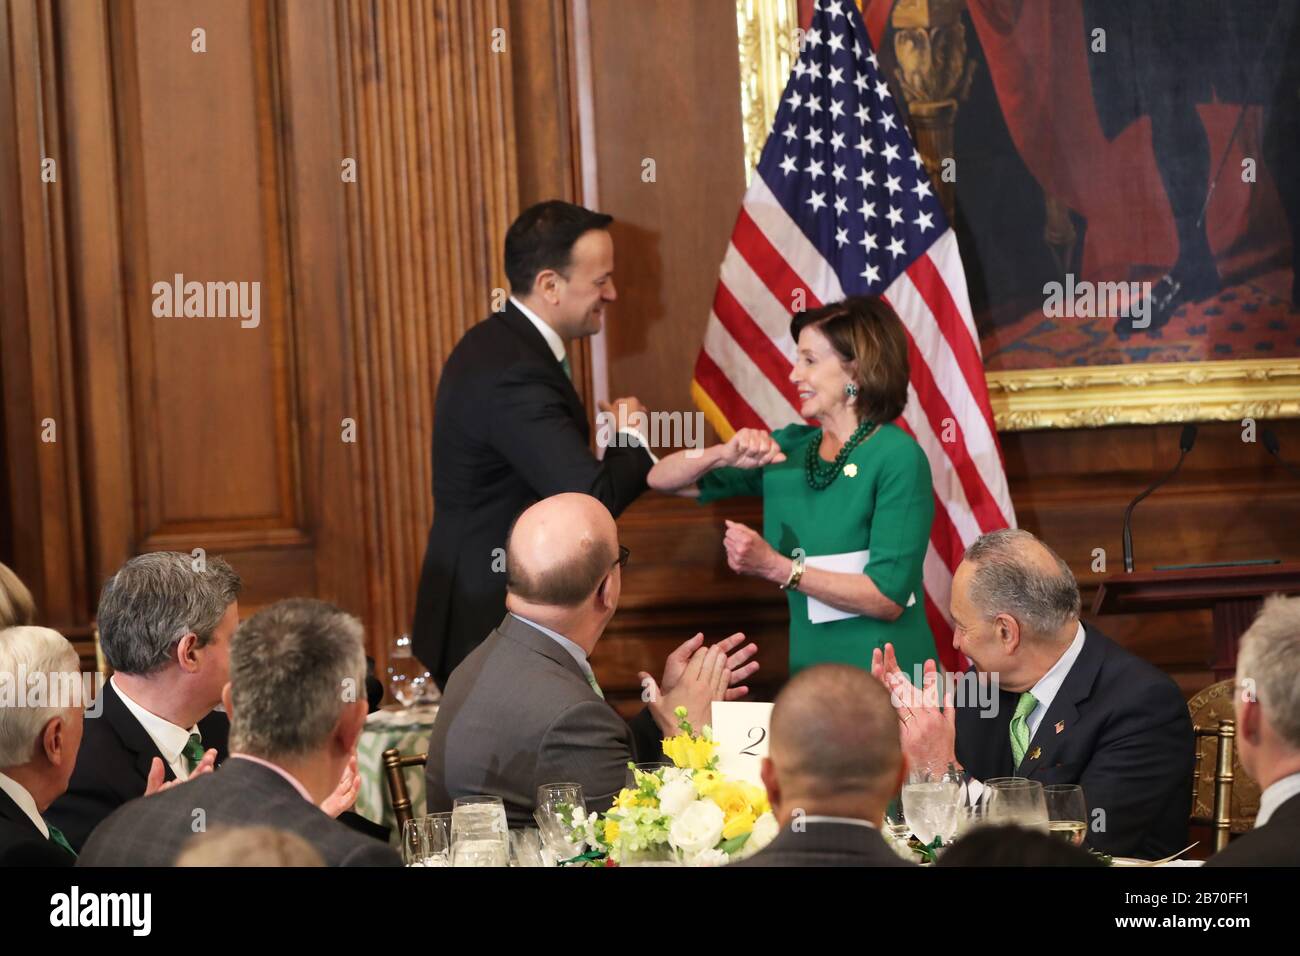 Nancy Pelosi, speaker of the United States House of Representatives, greets Taoiseach Leo Varadkar with a playful elbow bump, as he heads on stage at the Speaker???s luncheon on Capitol Hill in Washington DC during his visit to the US. Stock Photo